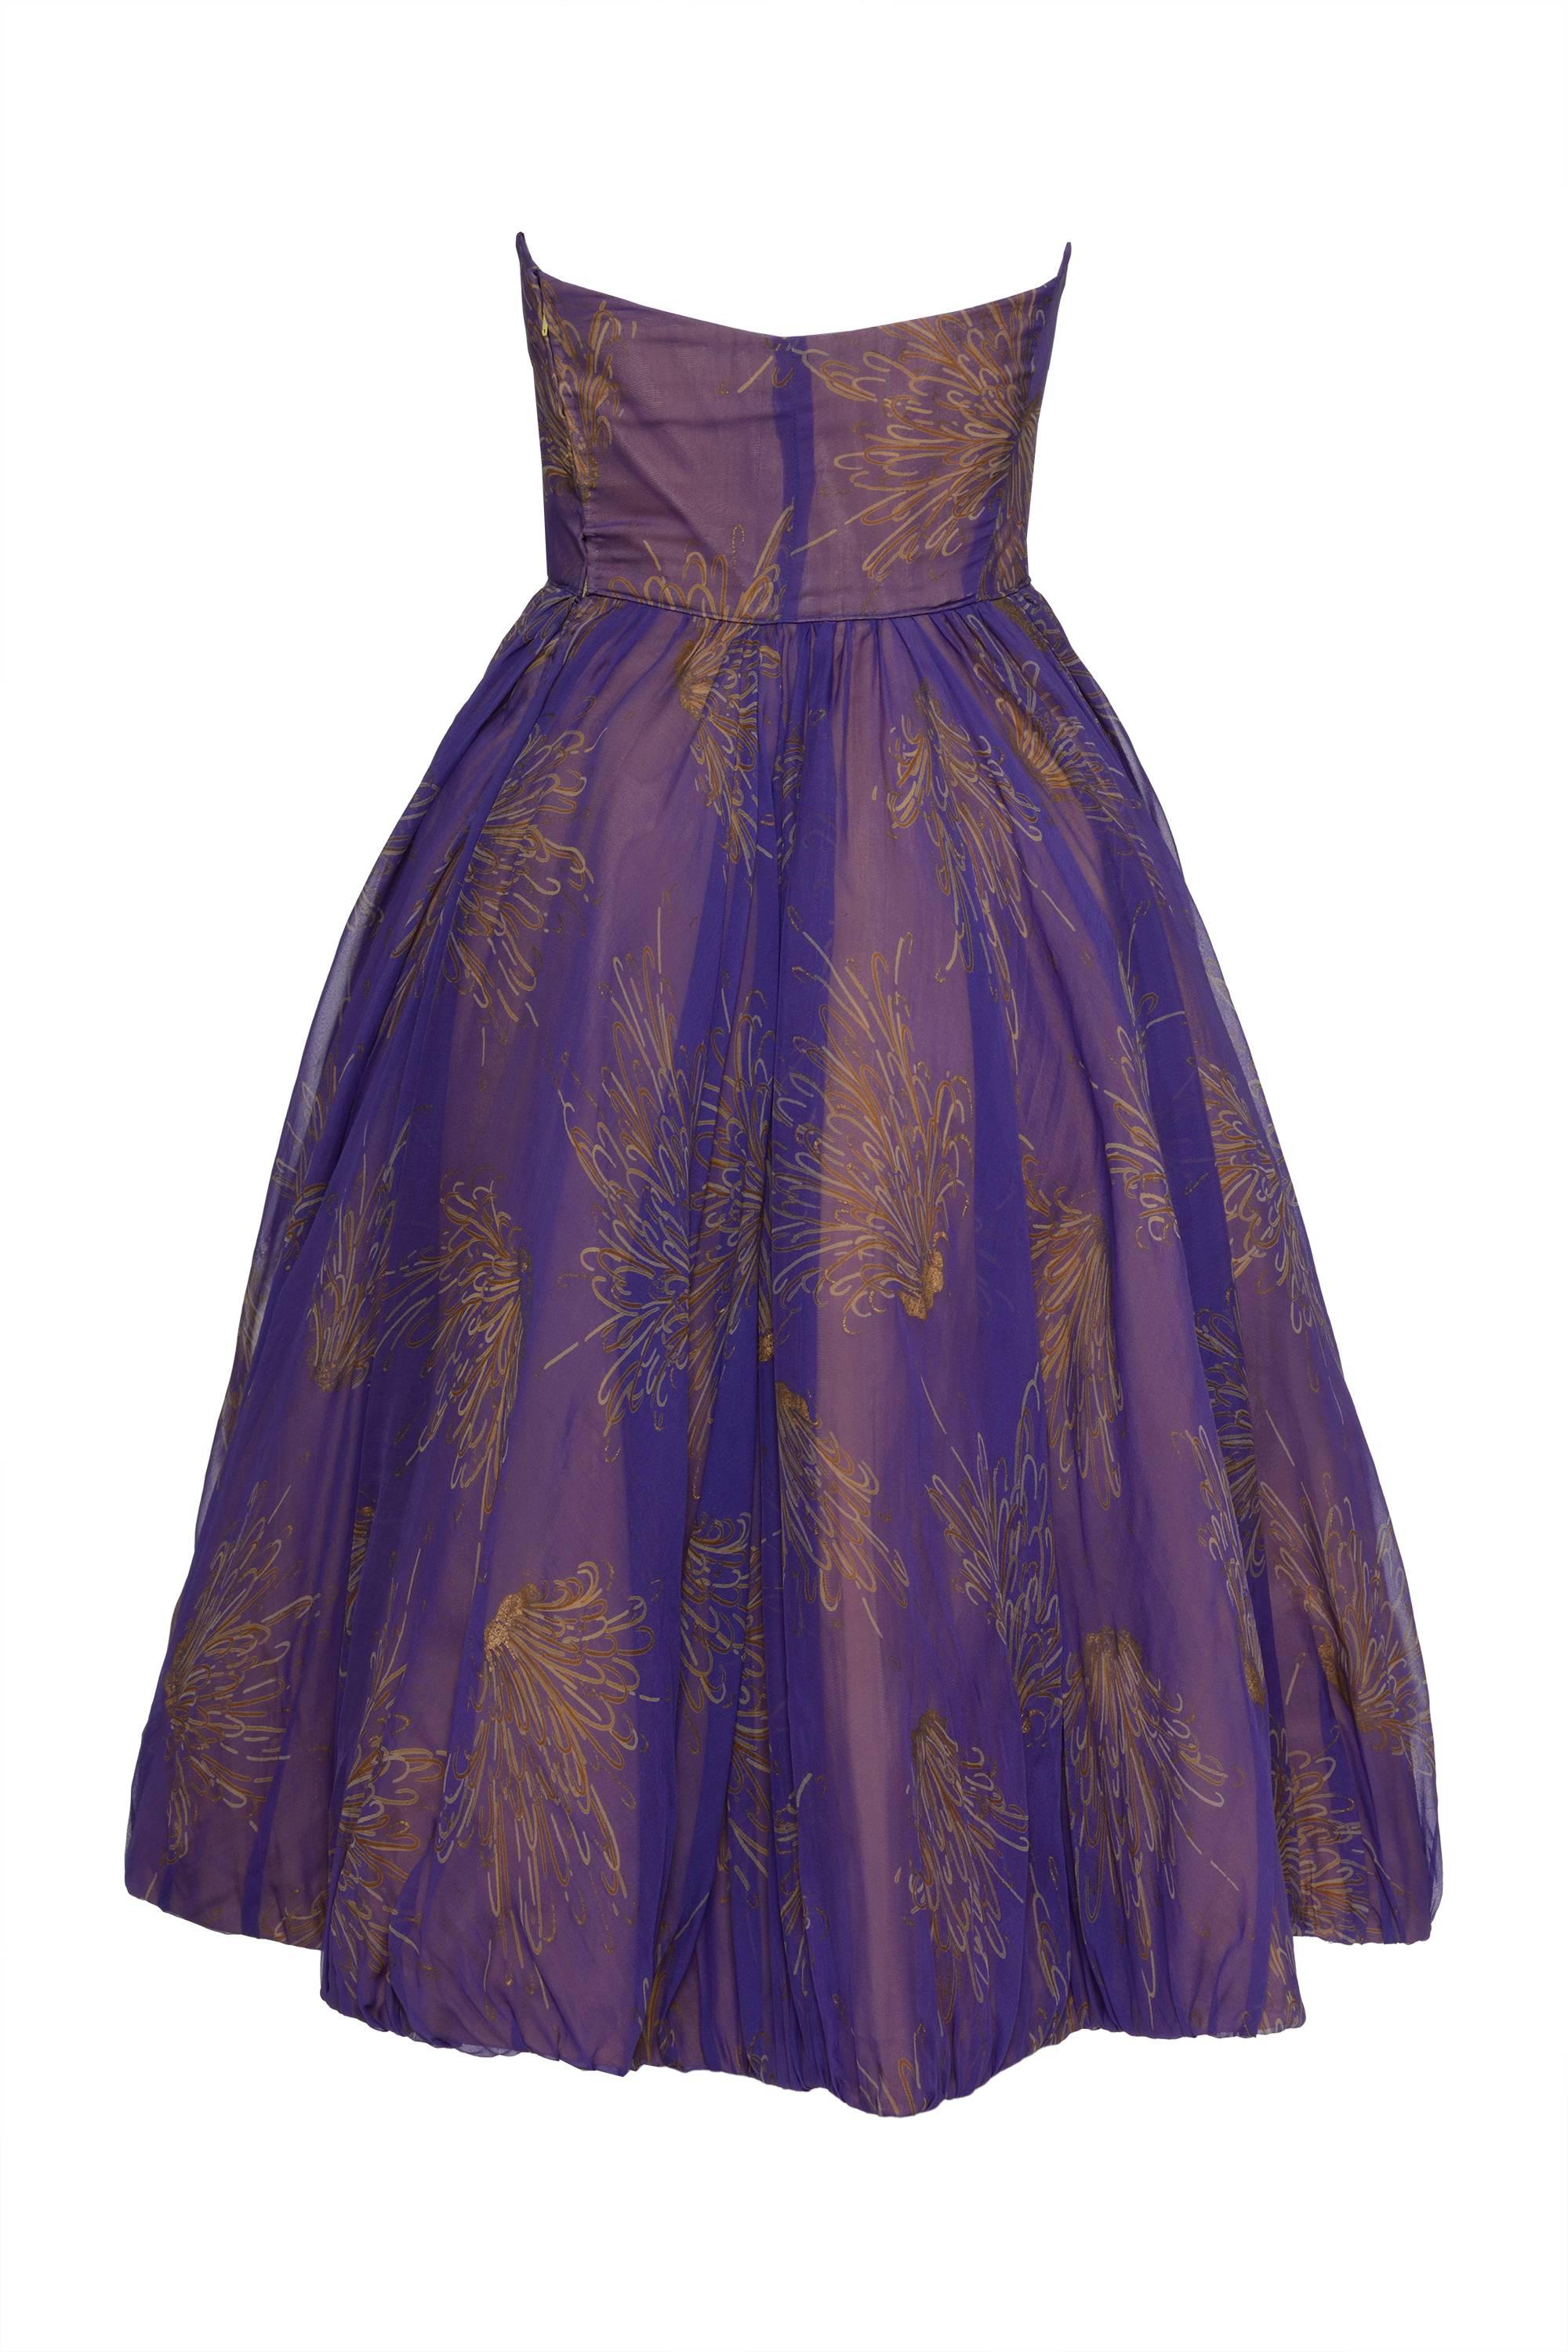 This stunning 1950s strapless dress is in purple organdy silk fabric with abstract floral print and has mustard yellow silk satin bows details. It has full circle skirt and side zip closure. It's fully lined and has crinoline petticoat.

Good